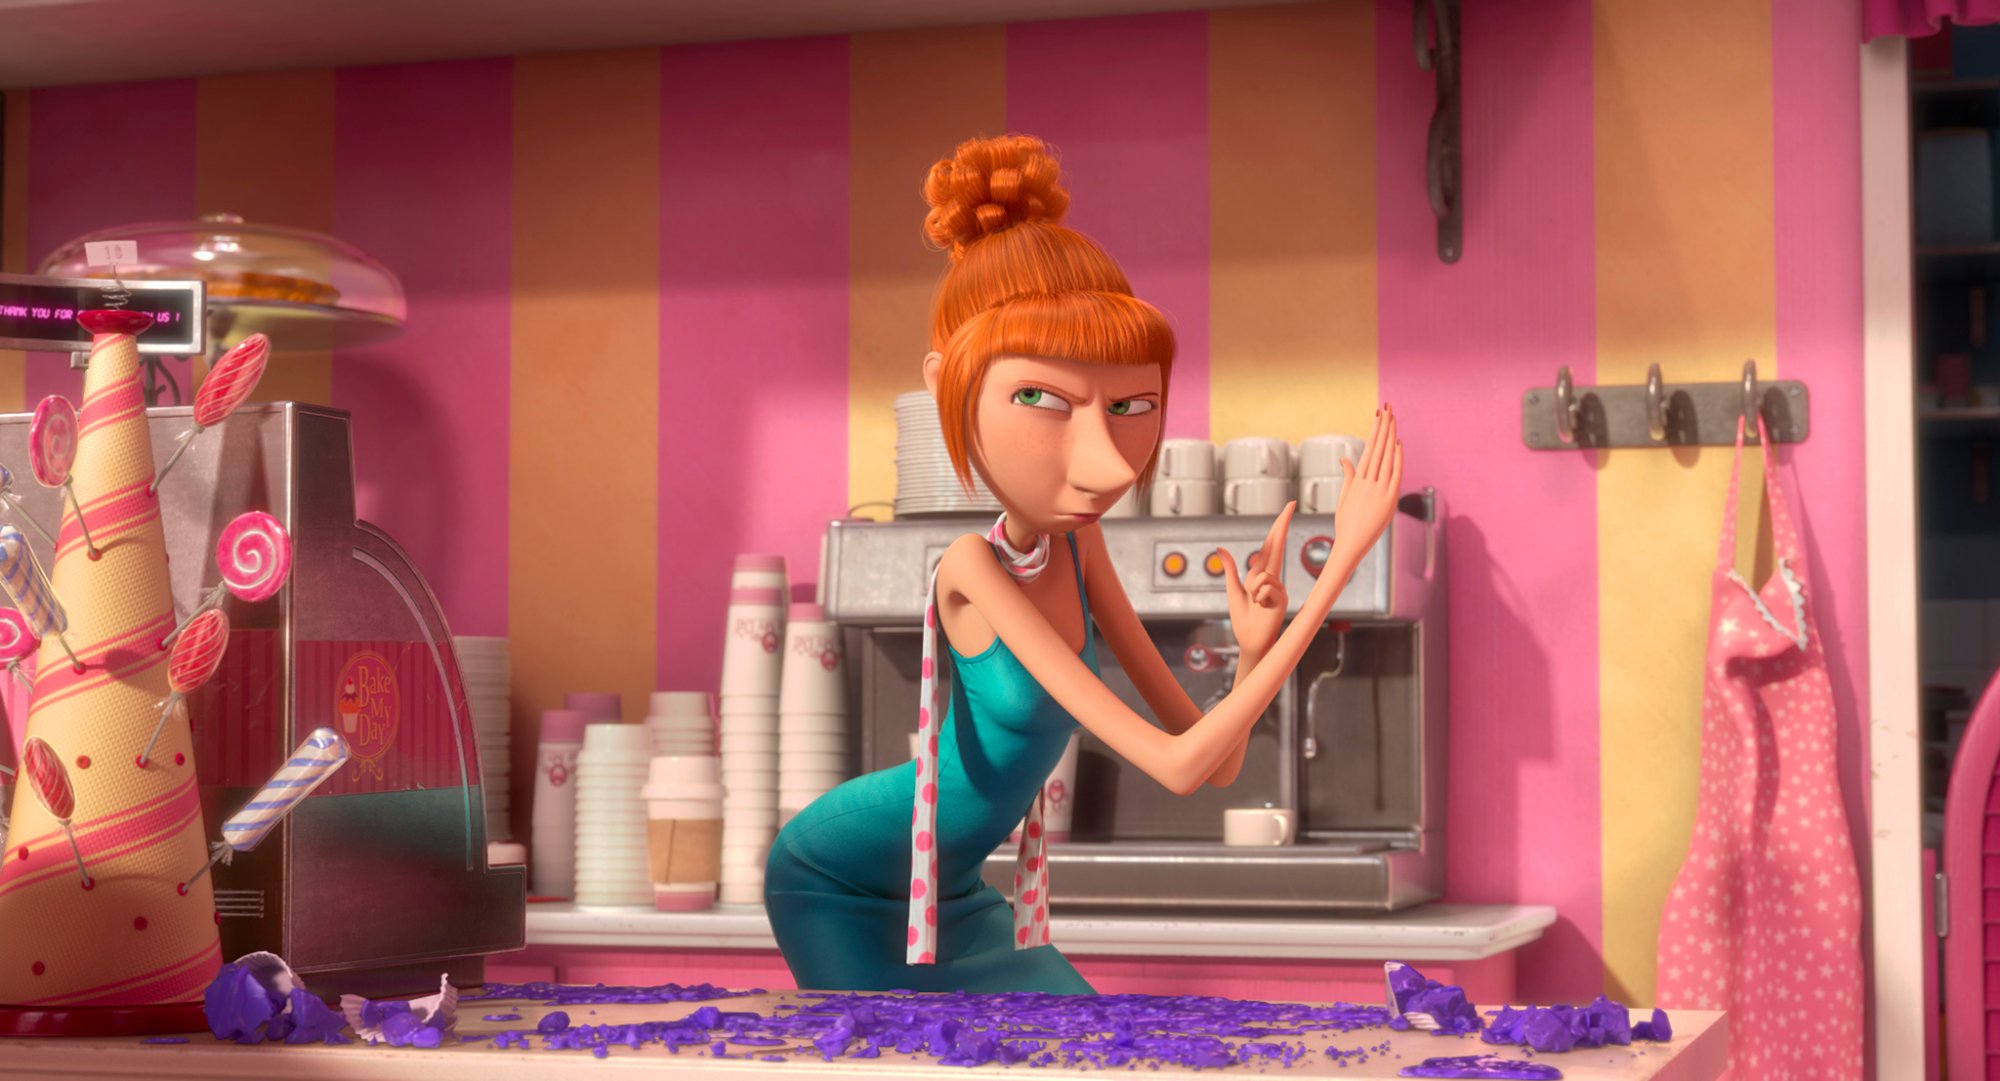 'Despicable Me 2' Lucy voiced by Kristen Wiig behind a counter in a fighting pose